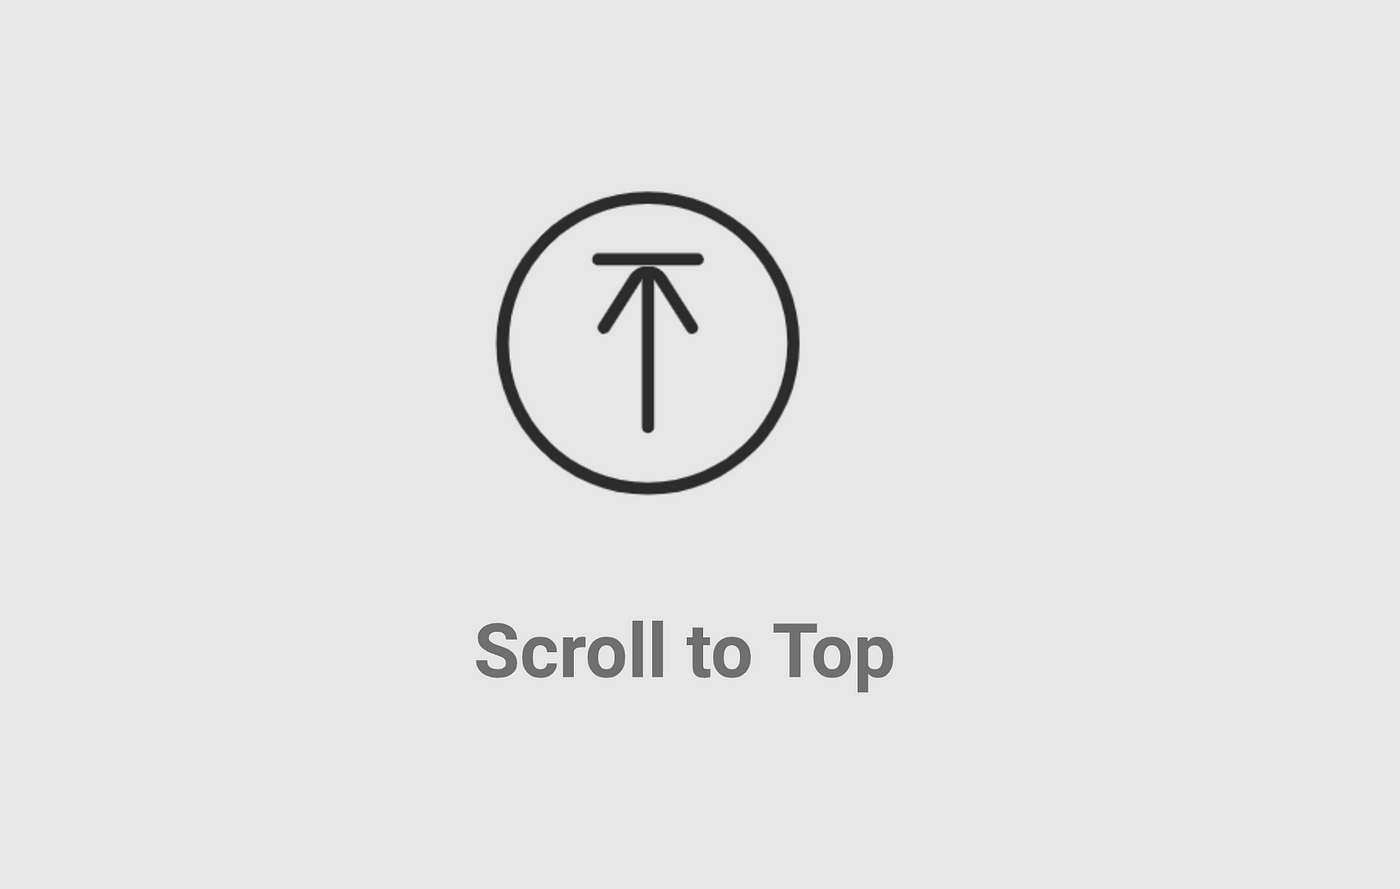 How to Implement Scroll to Top with Only CSS | by bitbug | Level Up Coding